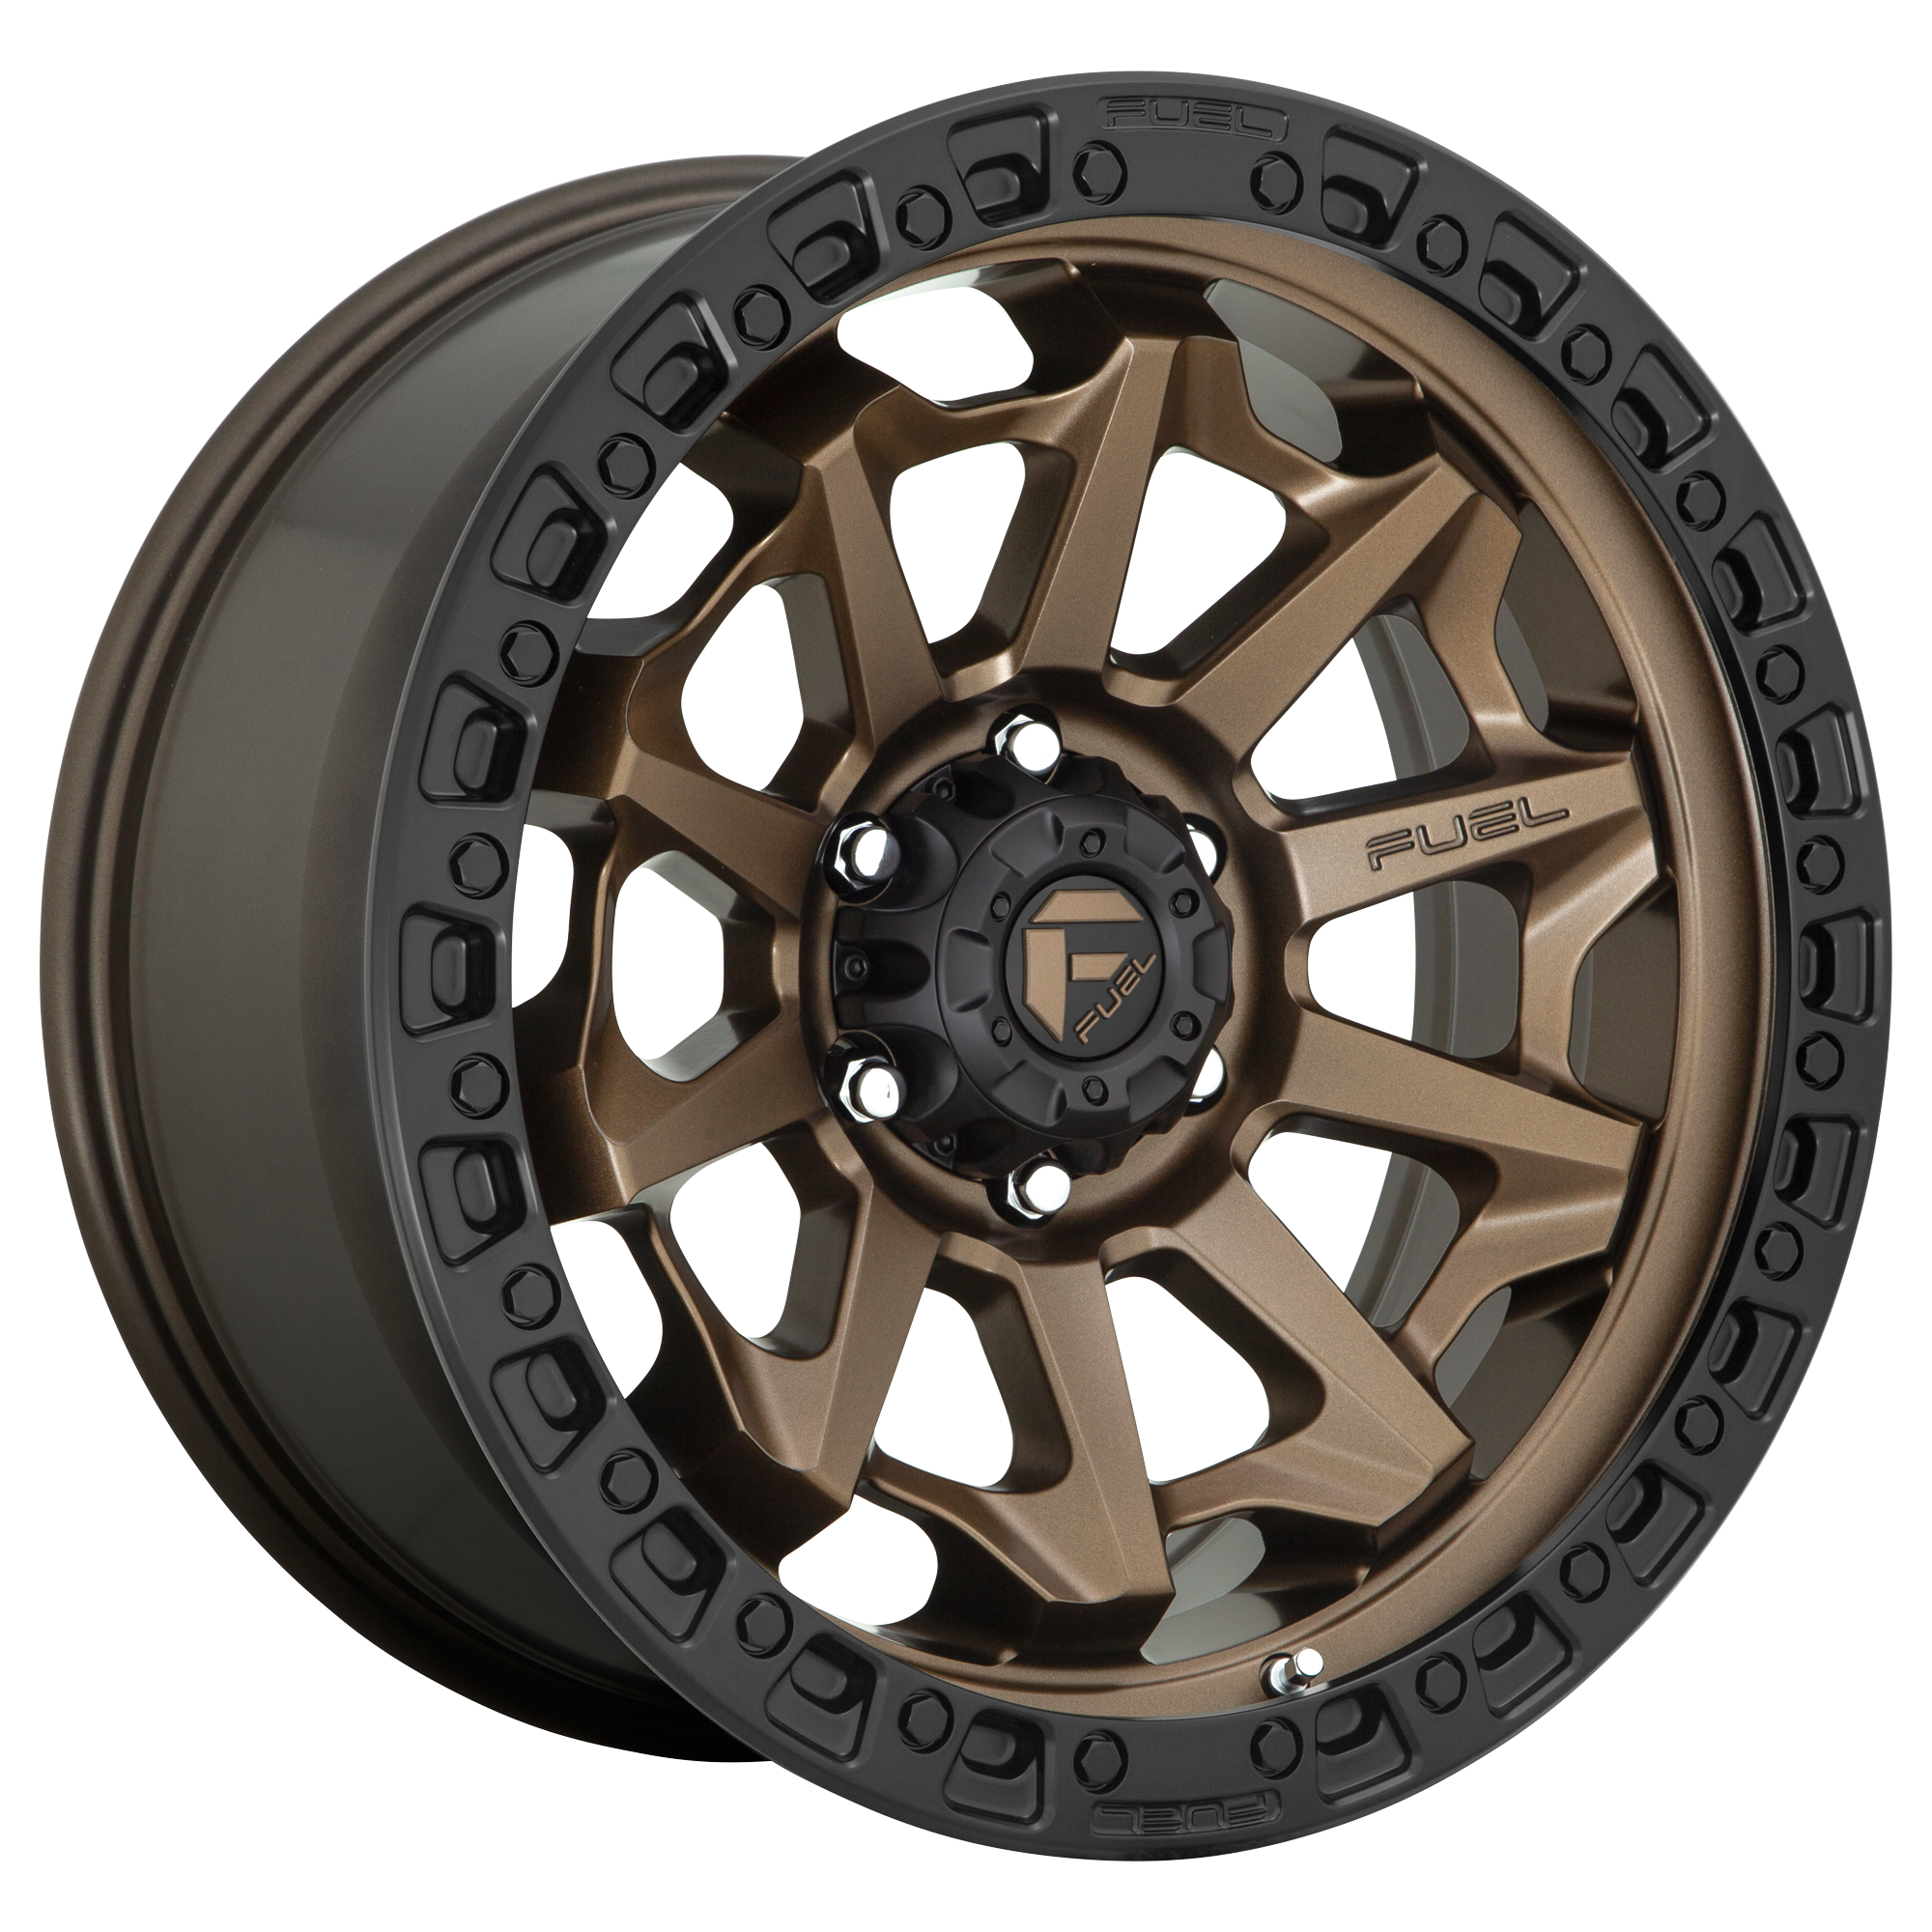 COVERT 18x9 5x150.00 MATTE BRONZE BLACK BEAD RING (1 mm) - Tires and Engine Performance